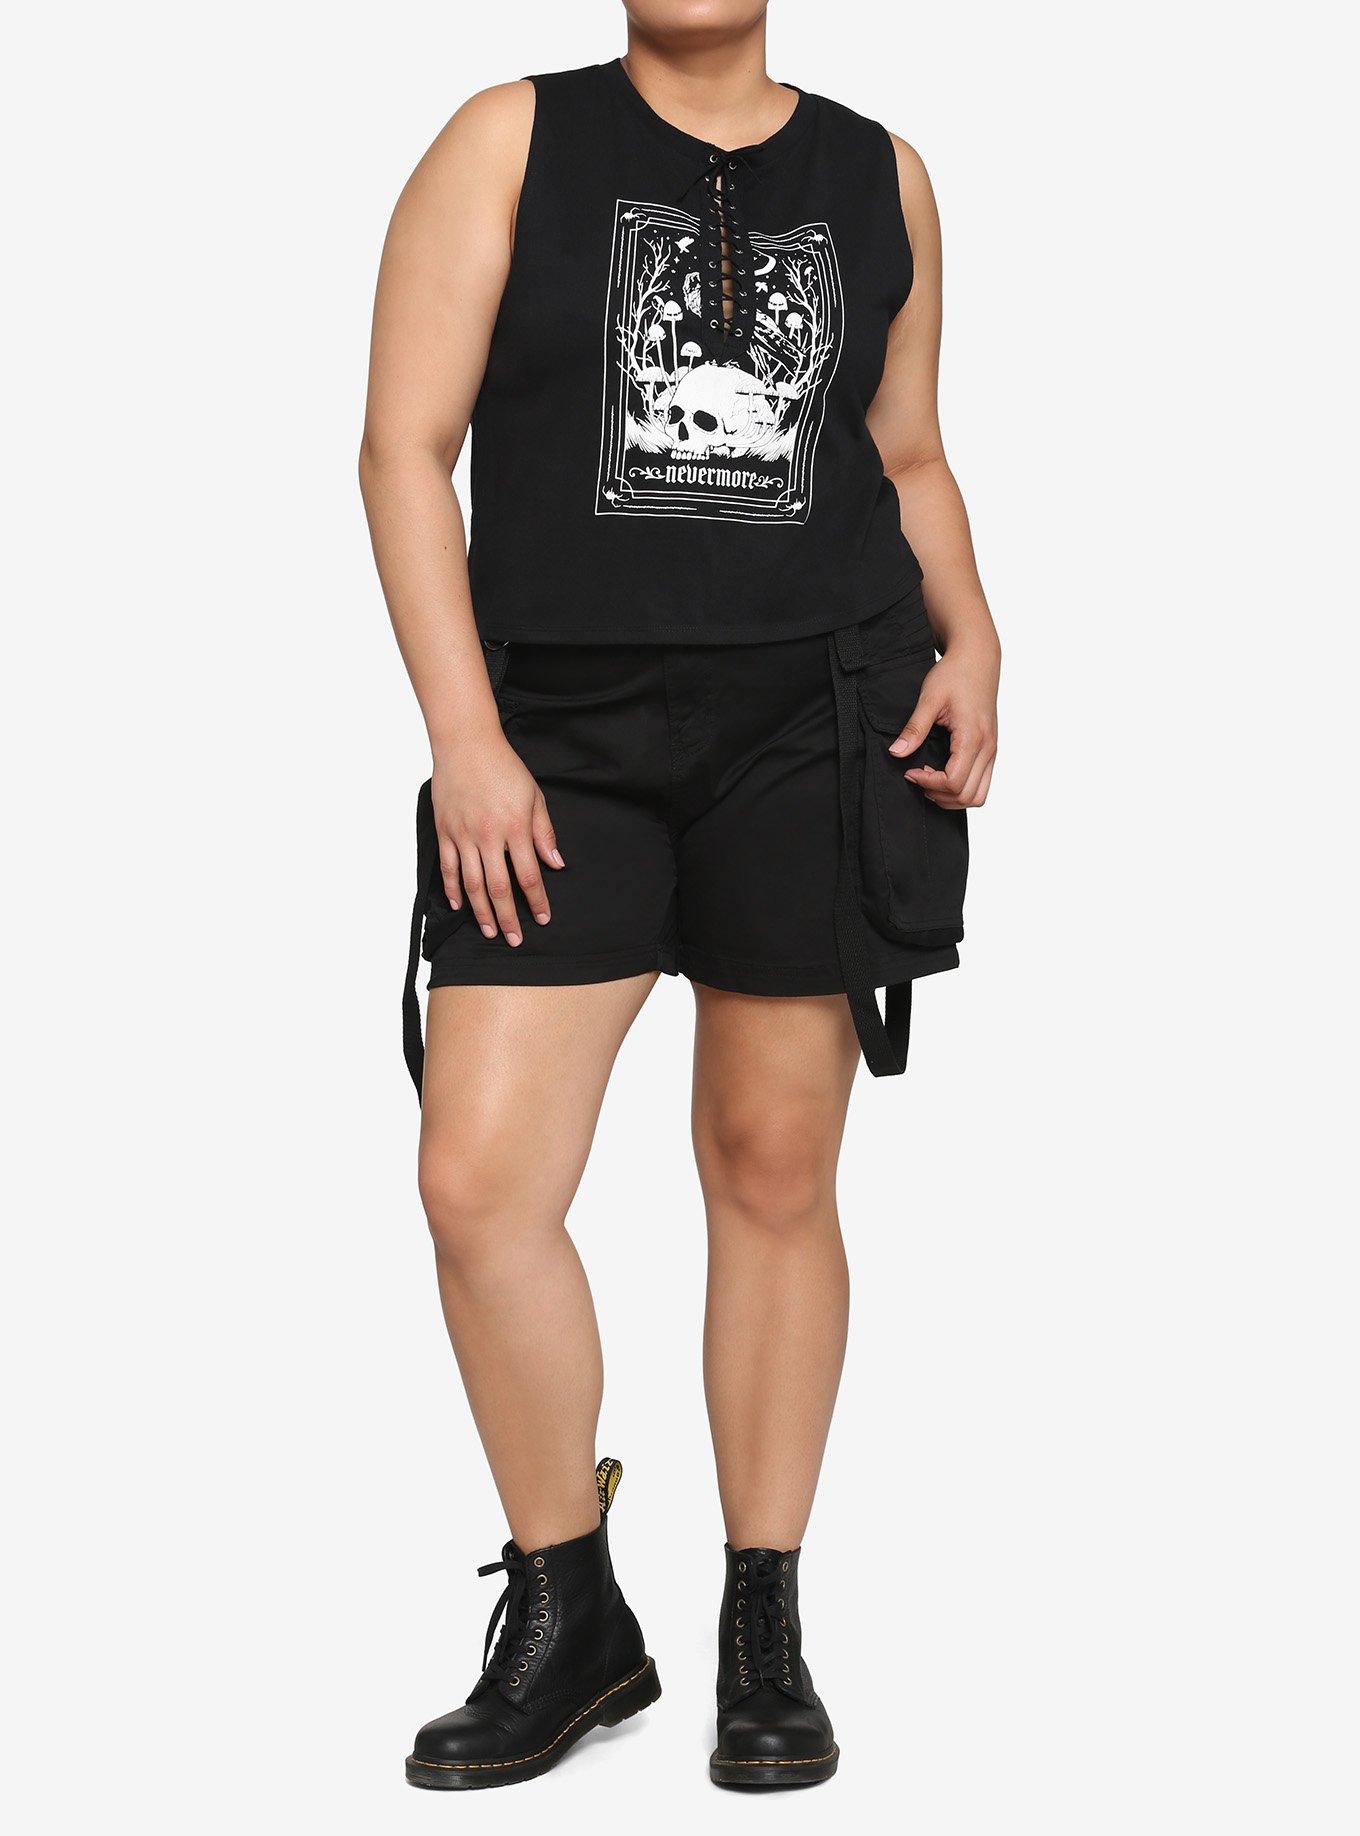 Tarot Card Nevermore Lace-Up Girls Muscle Tank Top Plus Size, BLACK, alternate